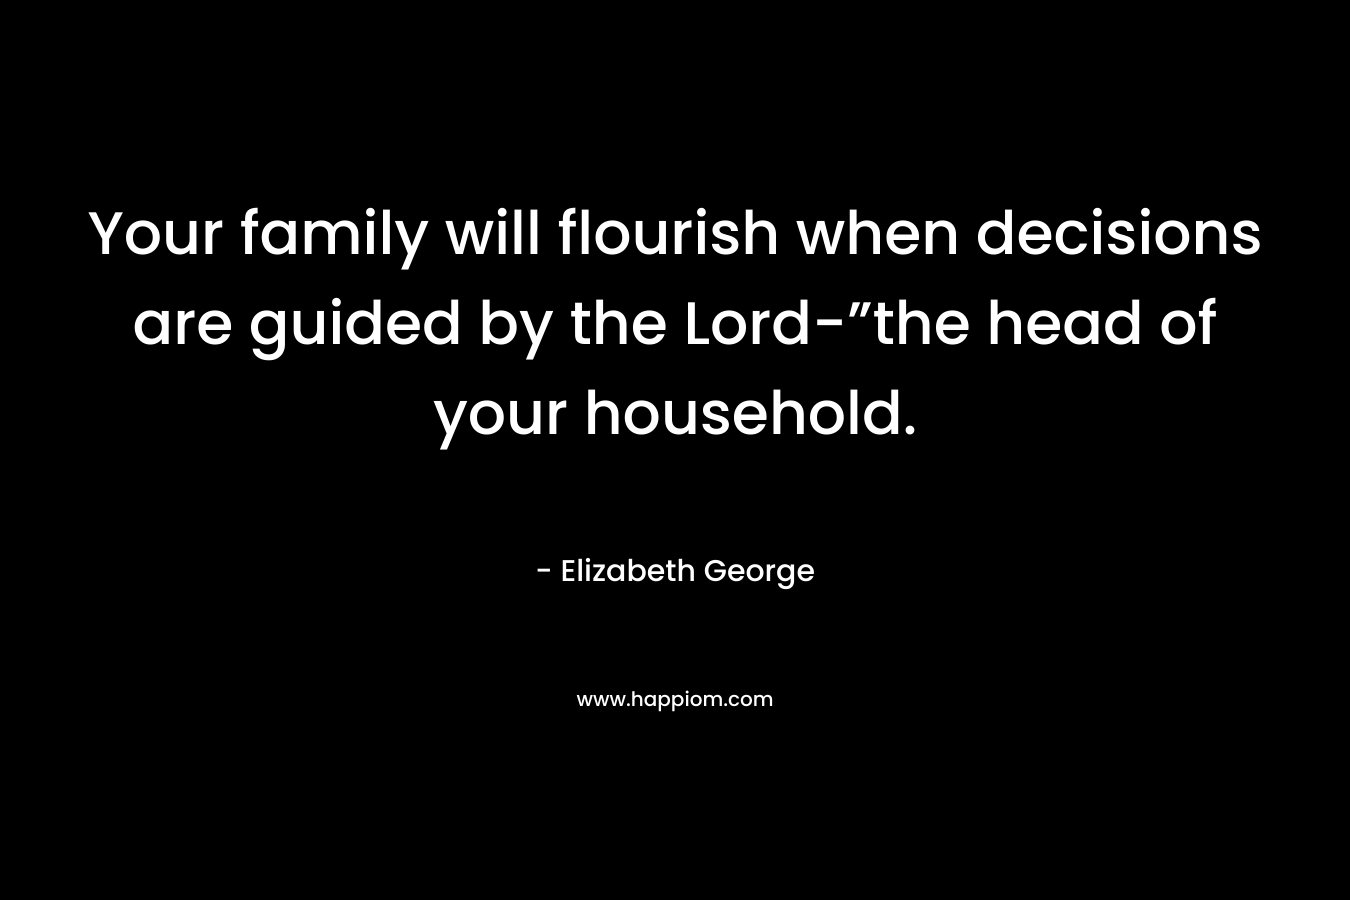 Your family will flourish when decisions are guided by the Lord-”the head of your household. – Elizabeth George